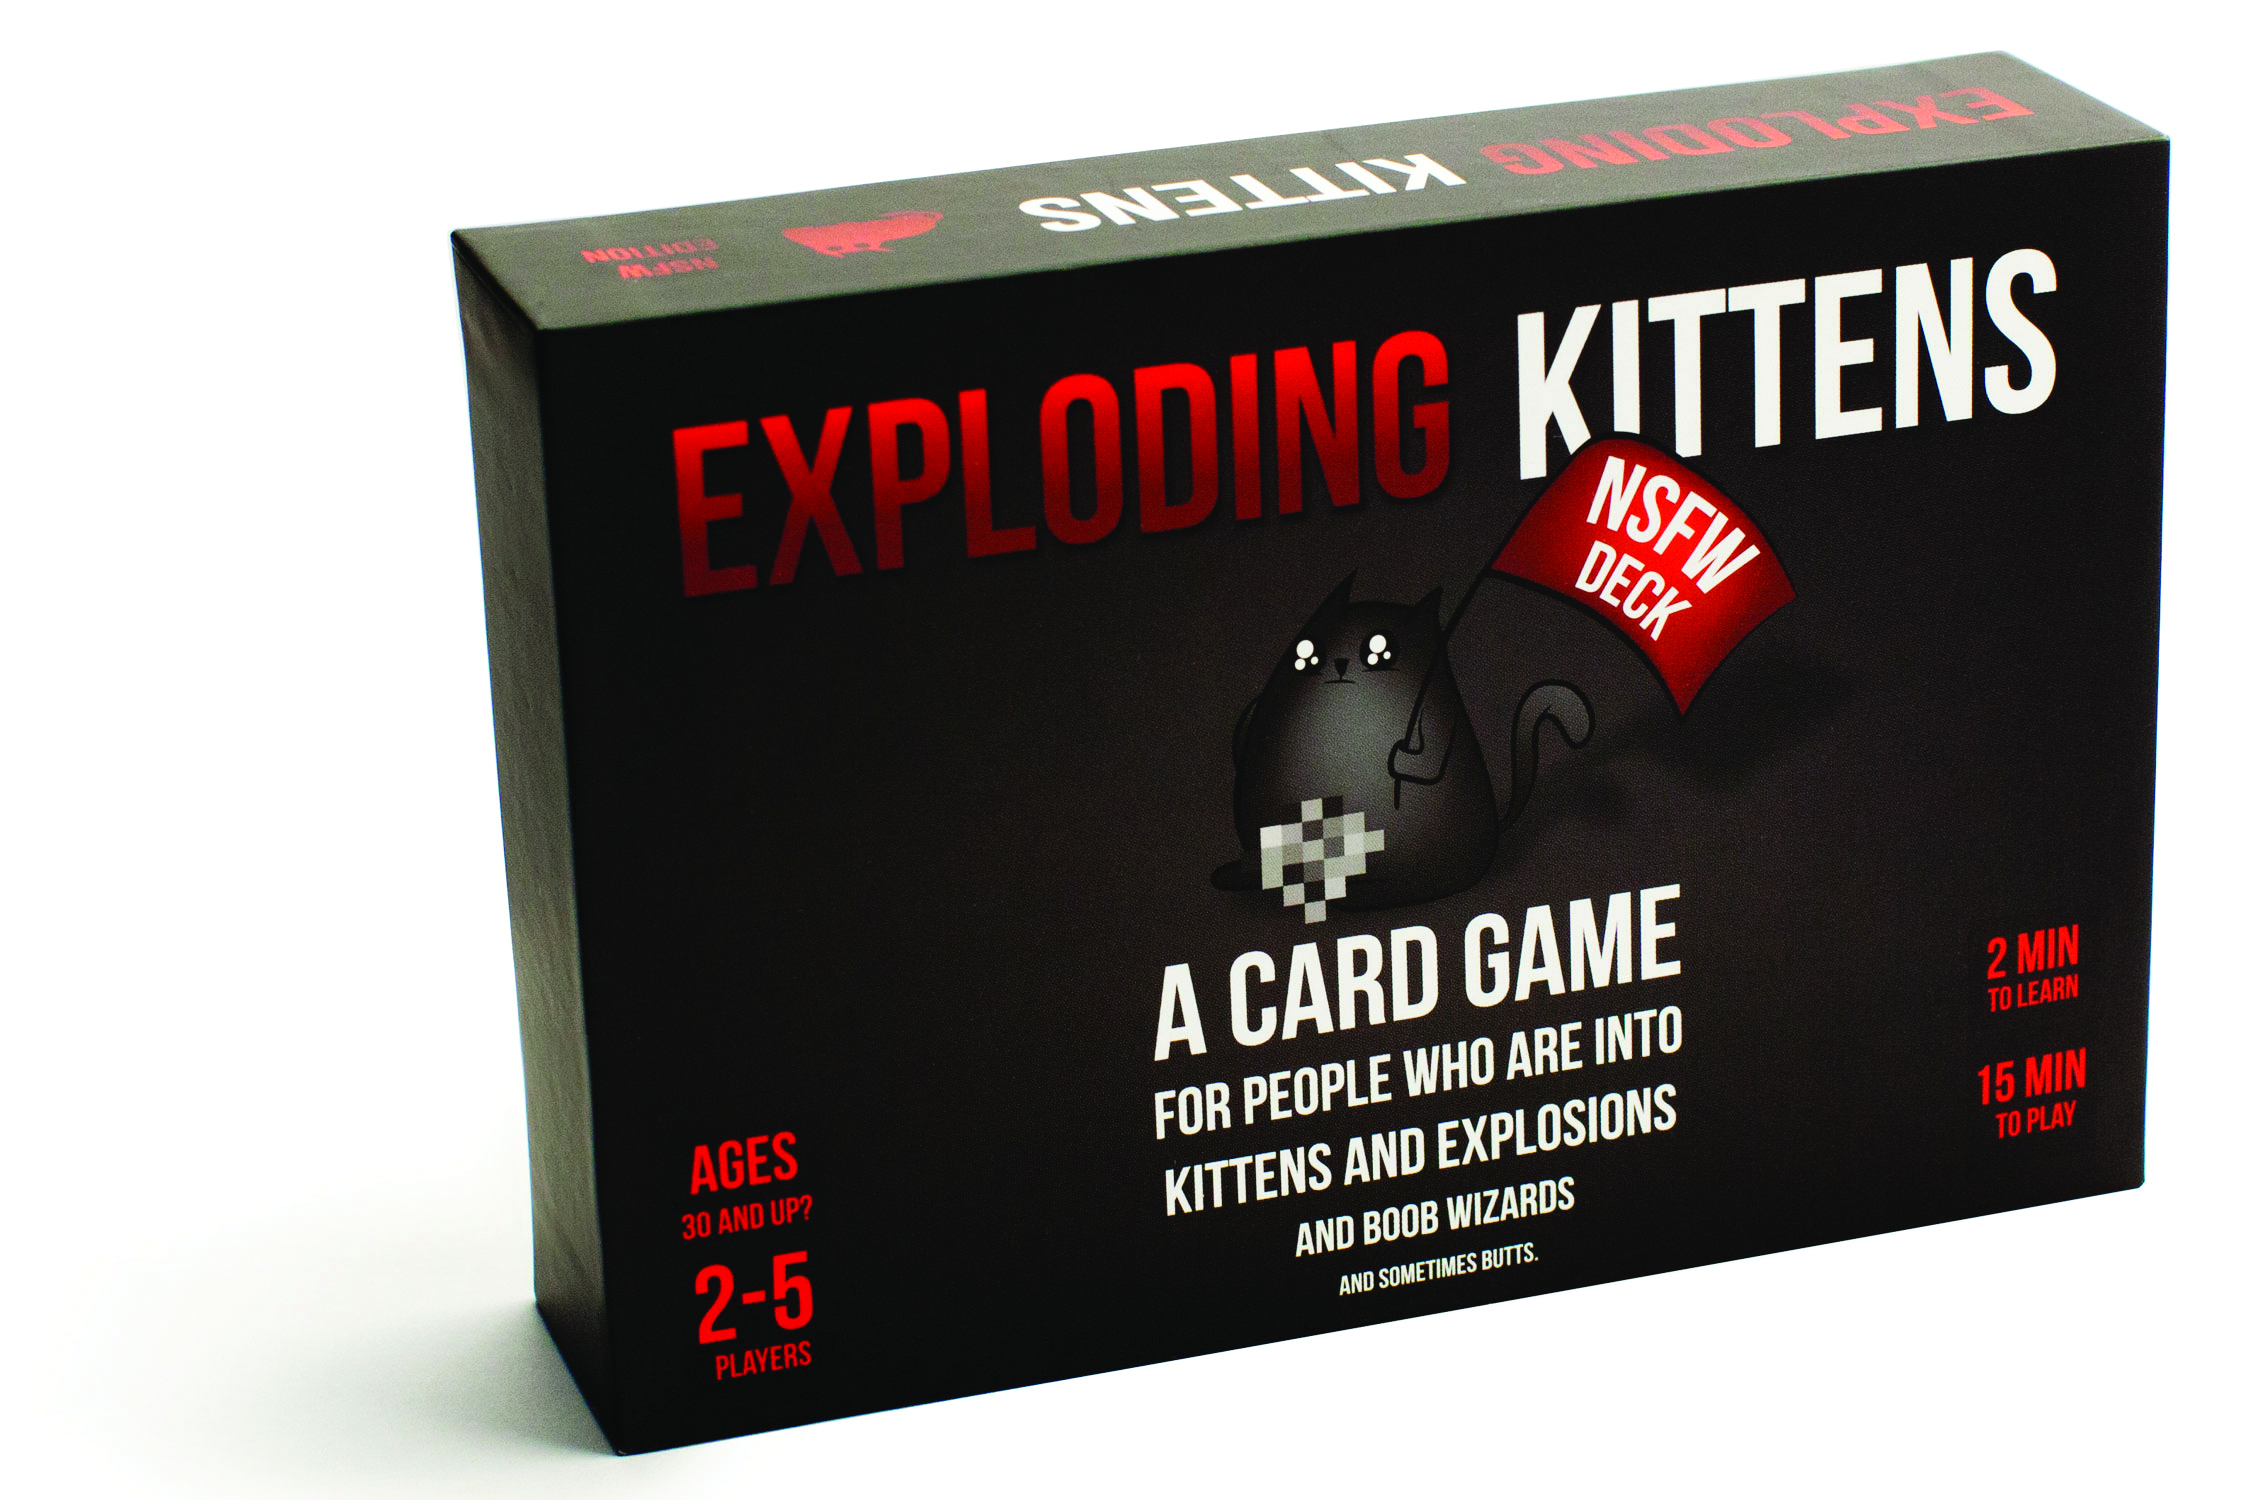 EXPLODING KITTENS NSFW ED CARD GAME - Party Games - Worlds' End Comics